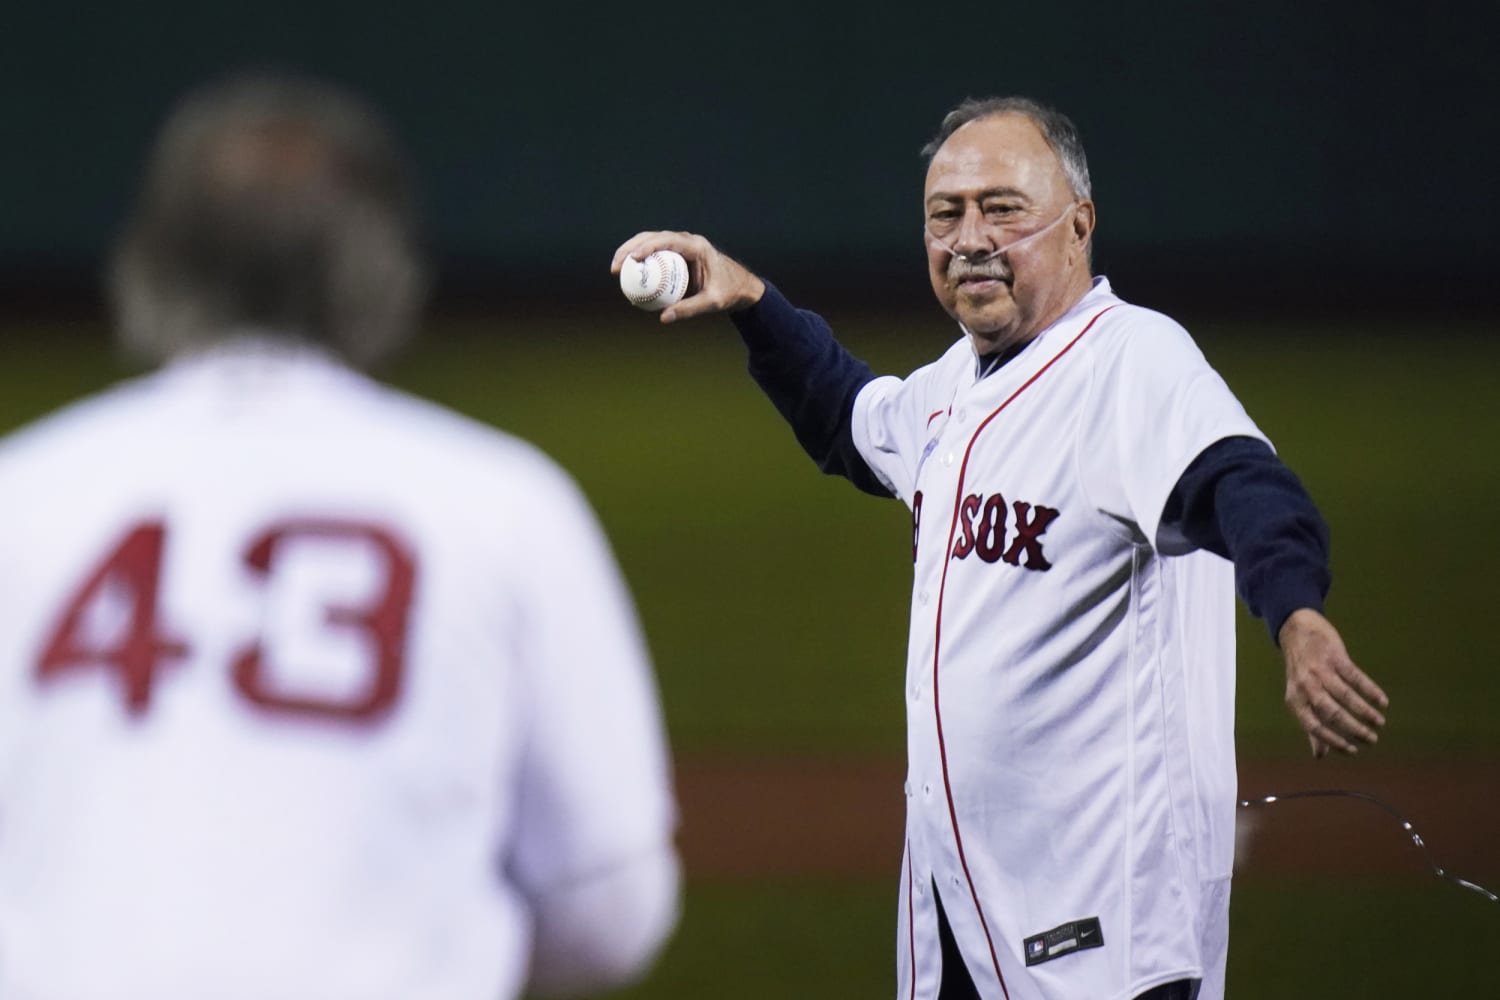 Red Sox Faithful Say Goodbye To Jerry Remy At Public Viewing In Waltham